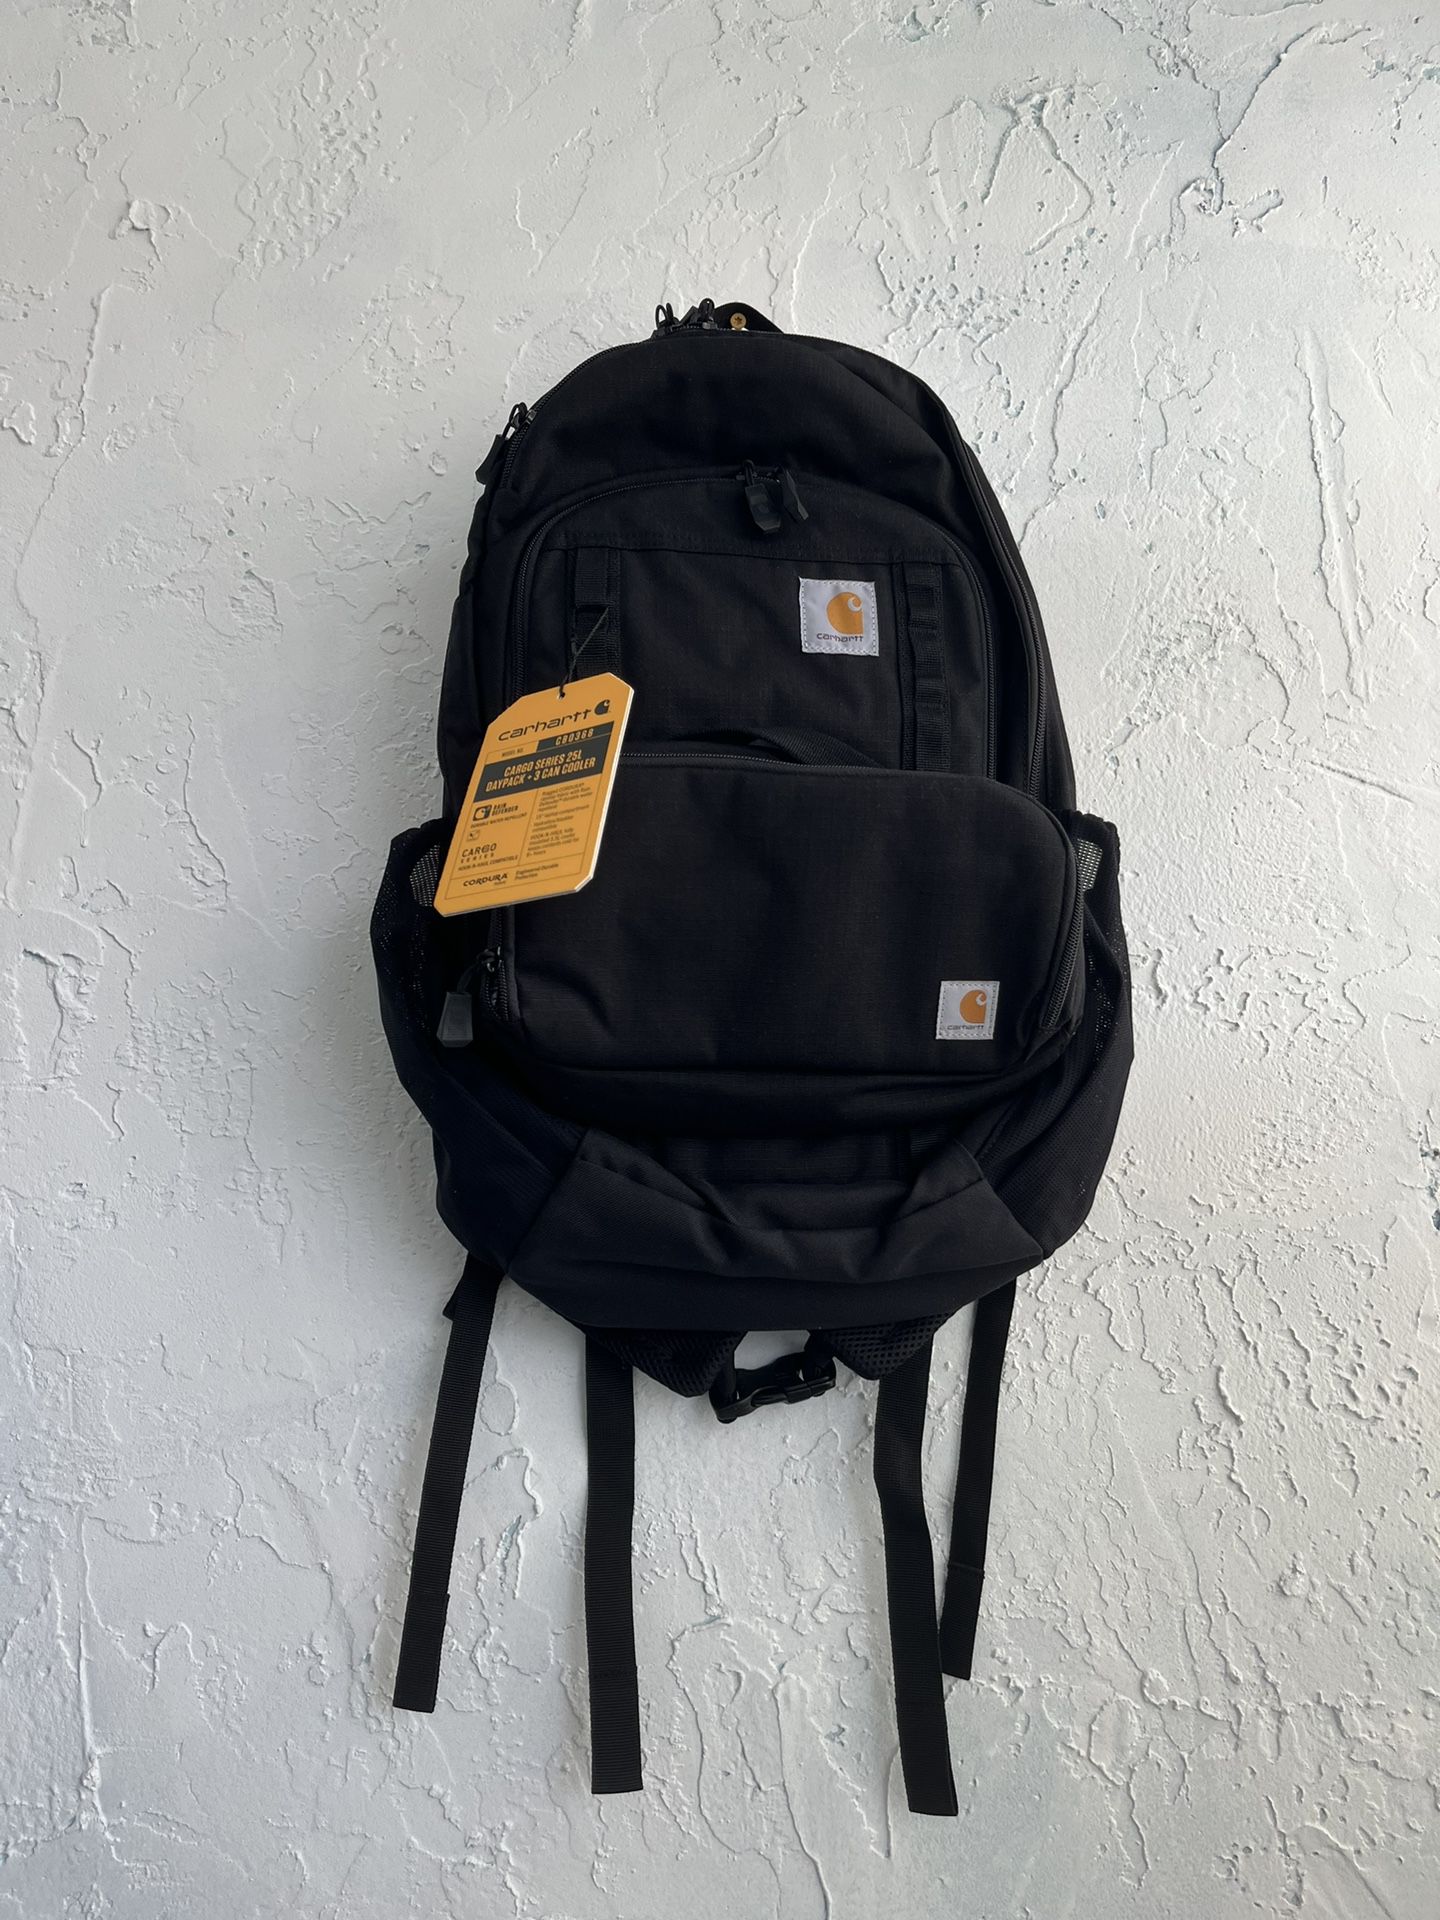 Carhartt Day Backpack with Cooler Bag - NEW